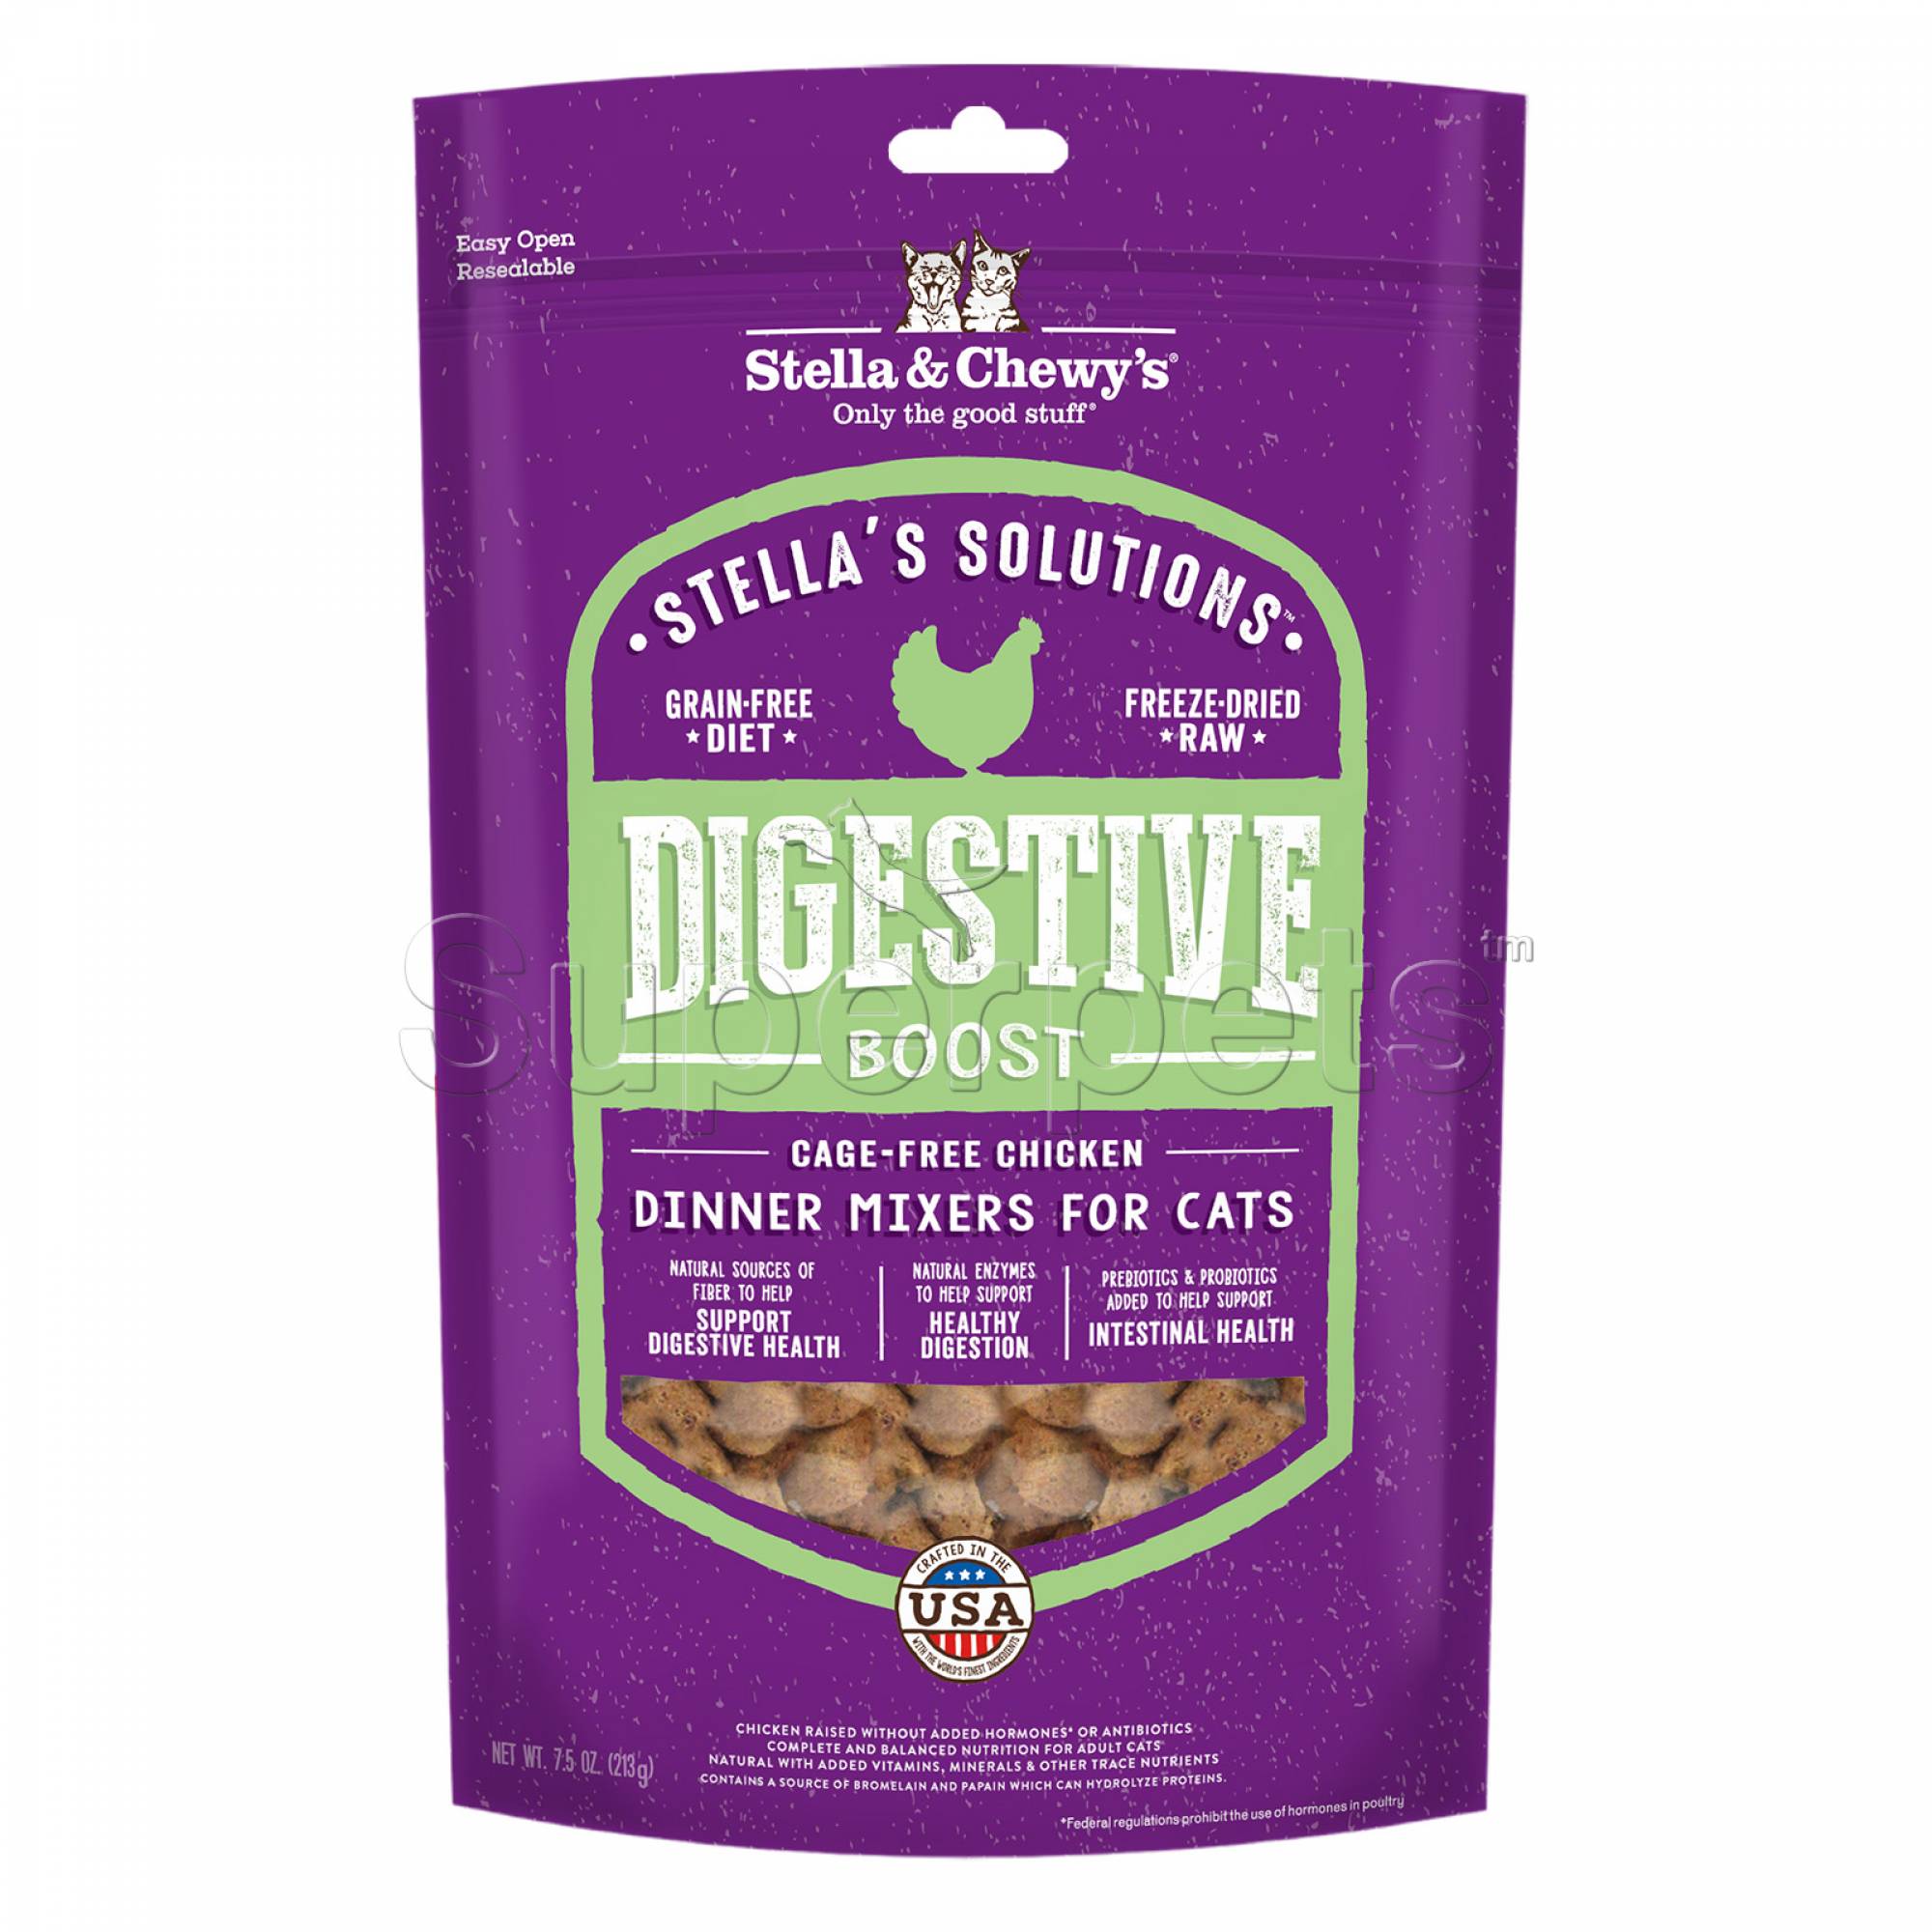 Stella & Chewy's - Cat Stella's Solutions Dinner Mixers - Digestive Boost - Cage-Free Chicken 7.5oz (213g)